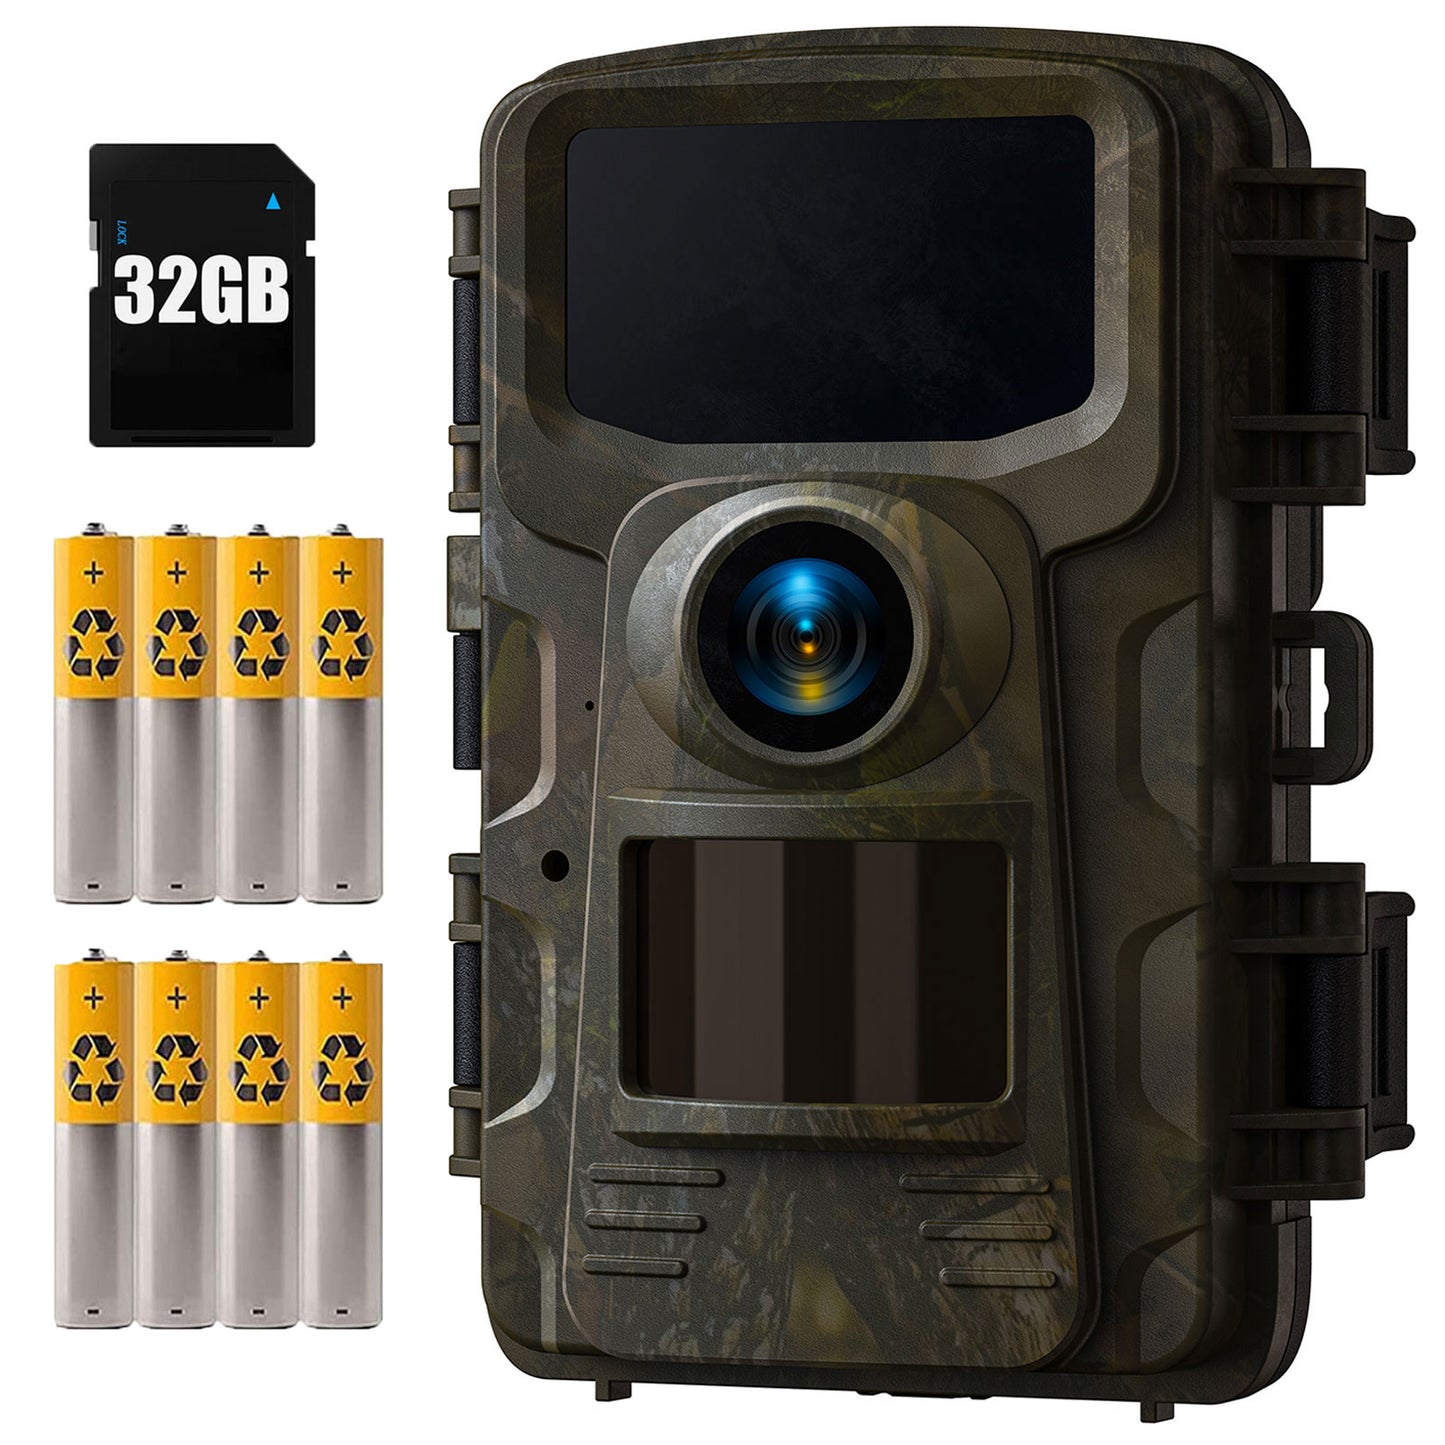 CAMPARK 2K 36MP Trail Camera with SD Card and Batteries Game Camera with 120°Wide-Angle Motion Latest Sensor View Hunting Deer Cam with Night Vision IP66 Waterproof 2.0" LCD for Wildlife Monitoring